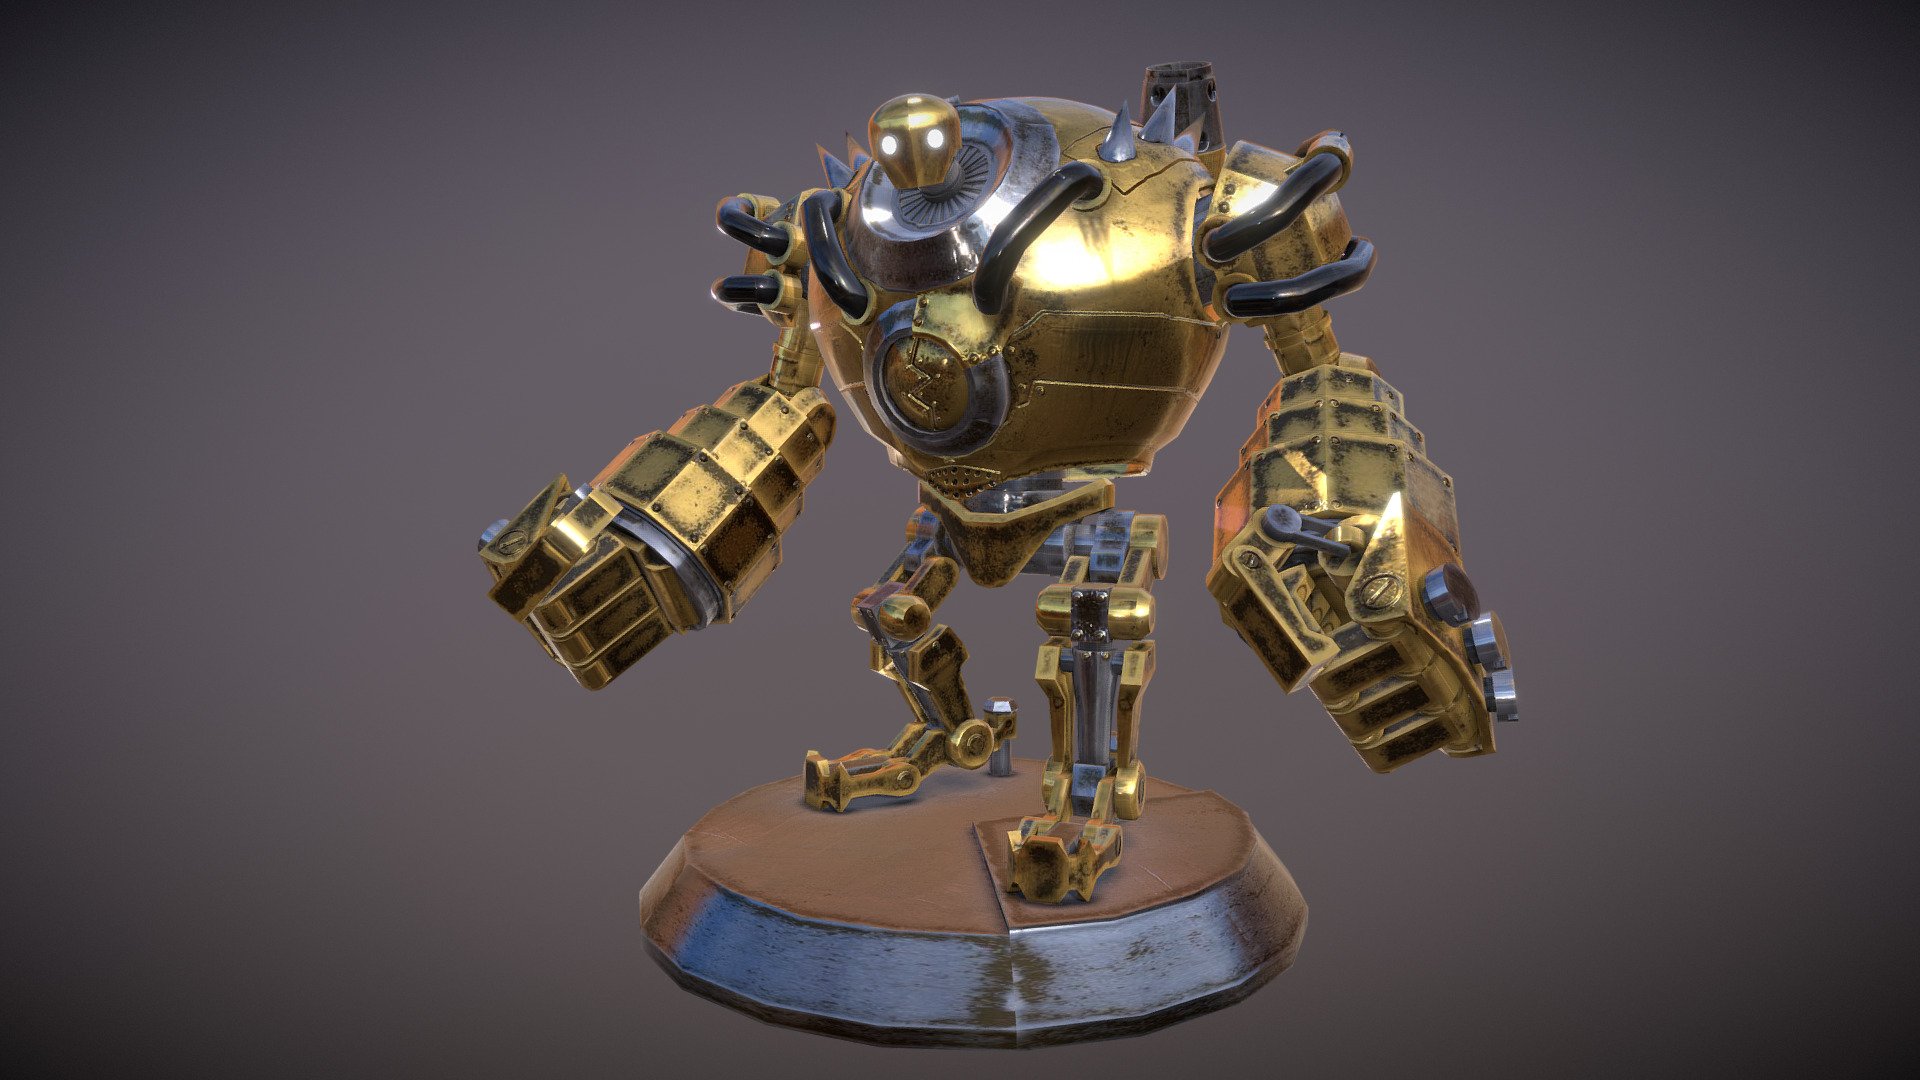 This is my reinterpretation of Blitzcrank inspired by the League of Legends' trailer &ldquo;The Climb